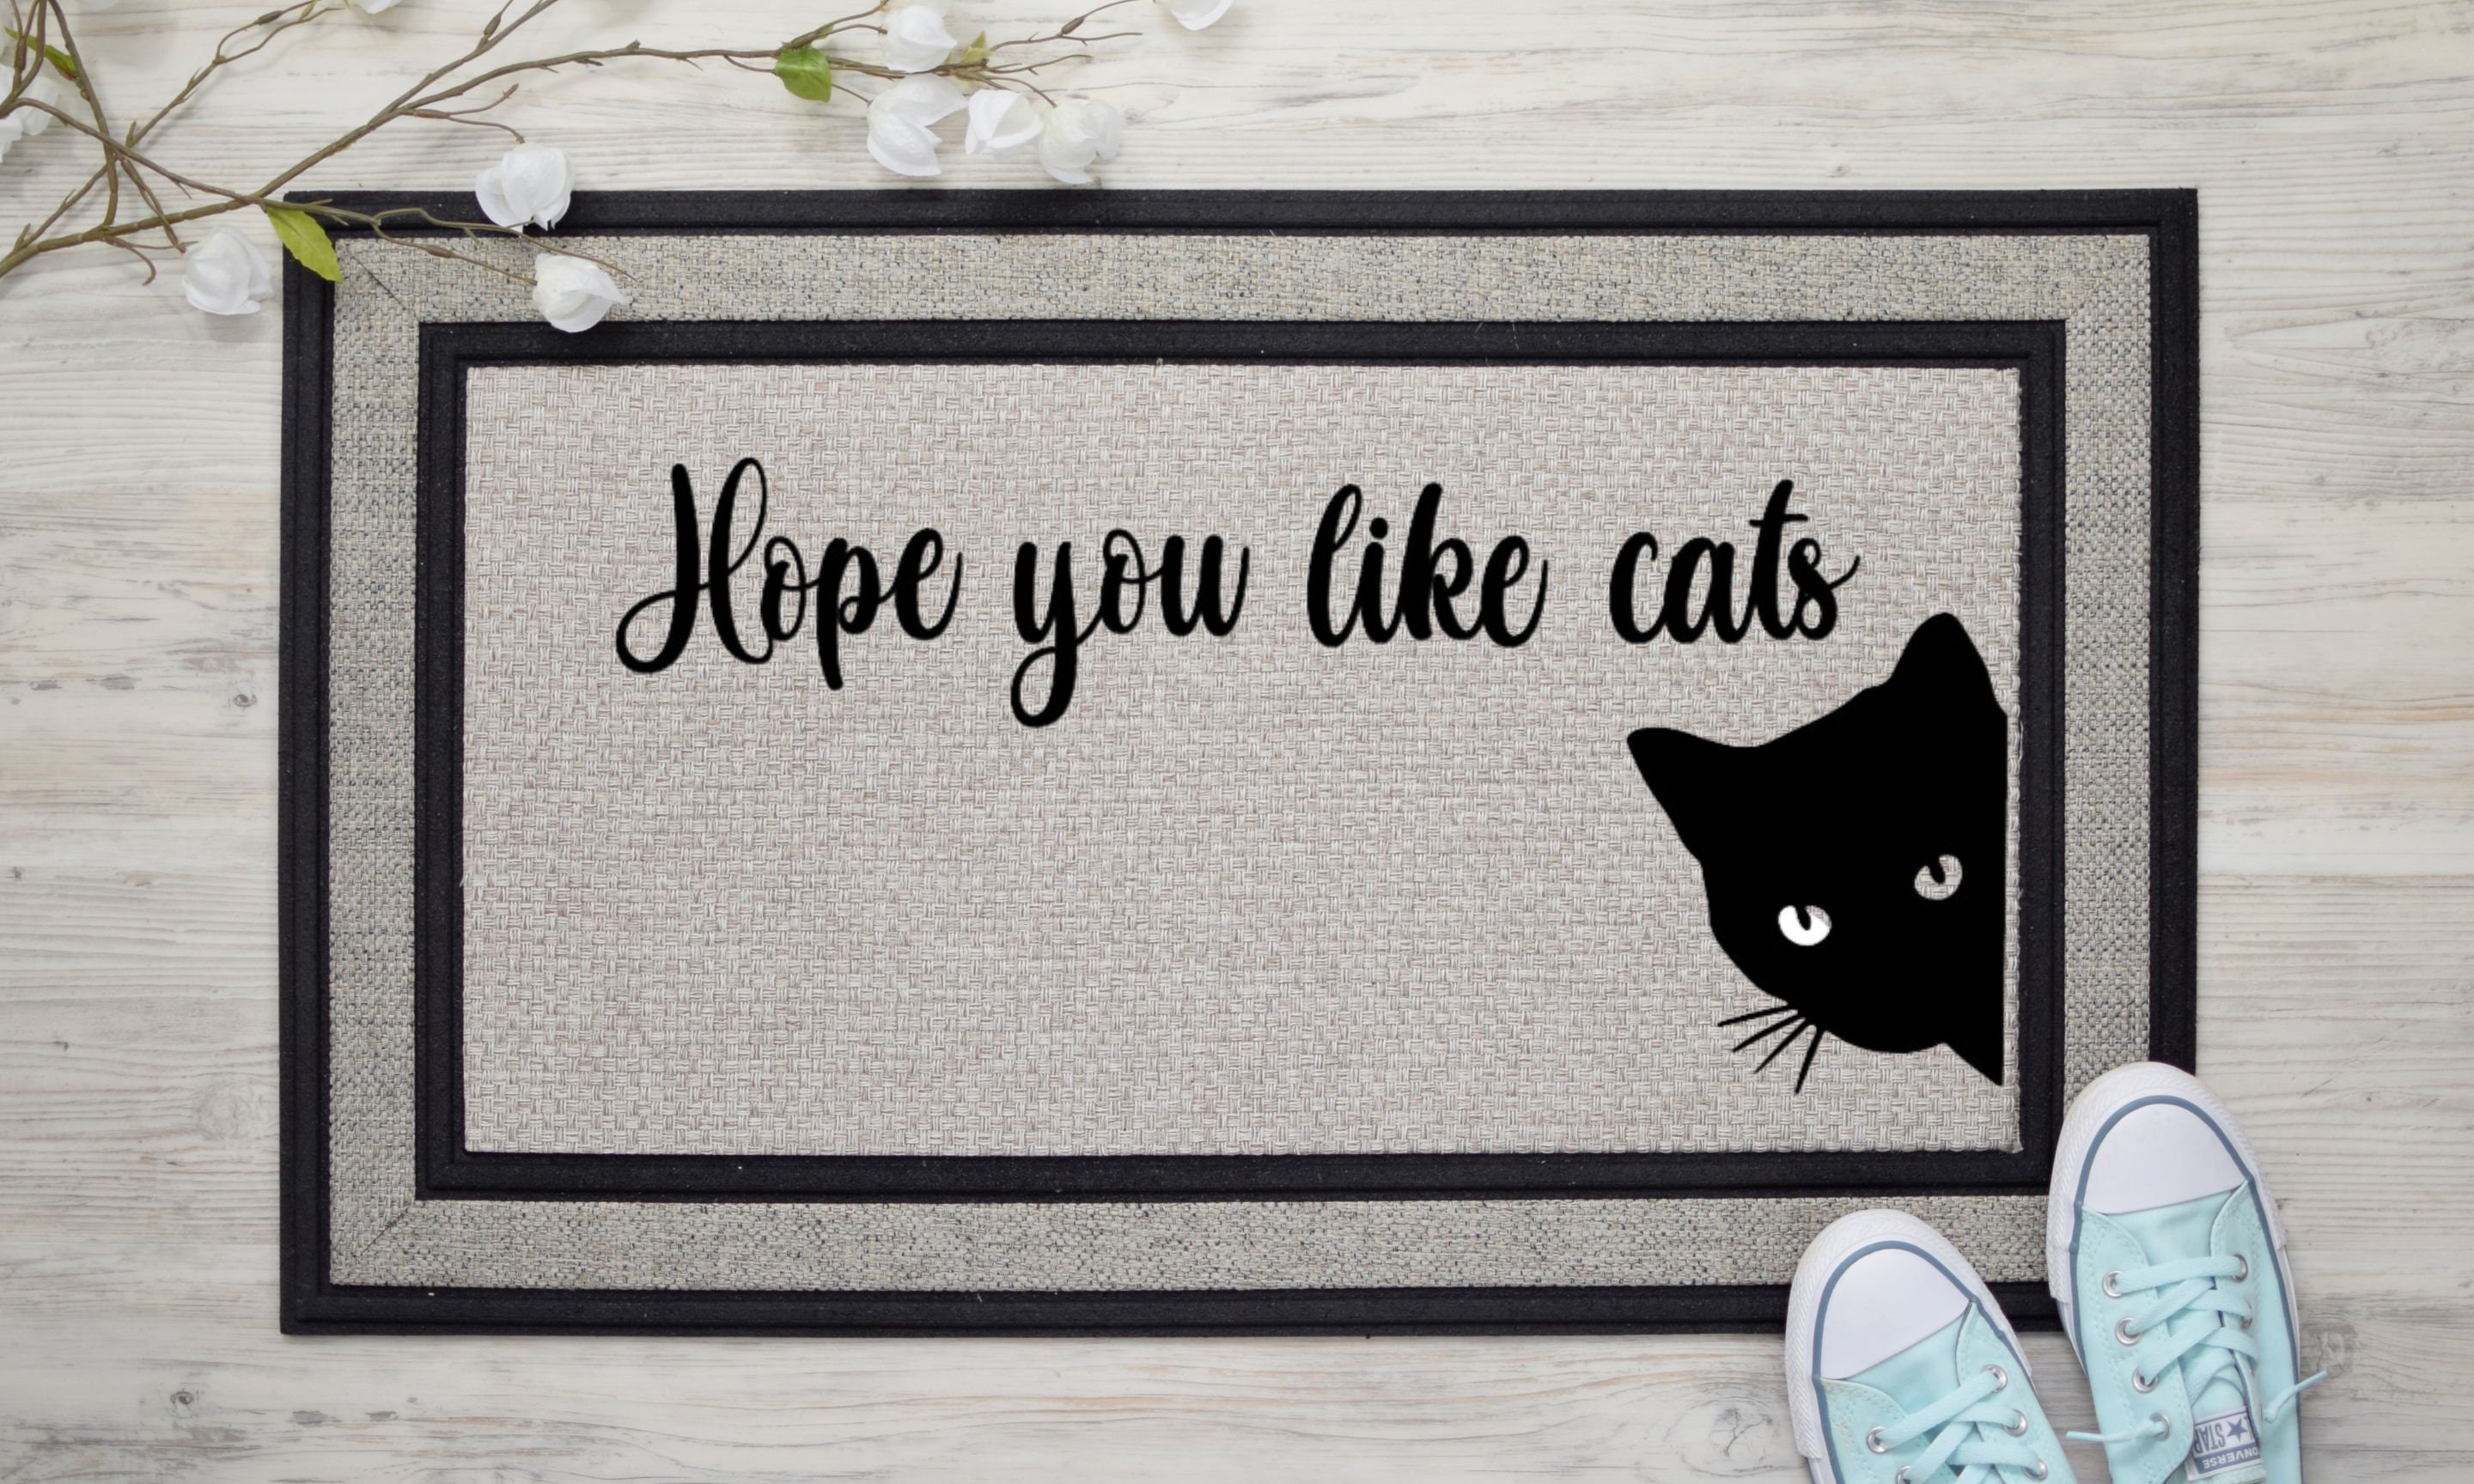 Funny Hope You Like Cats Entryway Outdoor Floor Mat with Heavy-Duty PVC  Backing Non Slip Cursive Natural Coconut Coir Brown Mat with Black Font  23.7 x